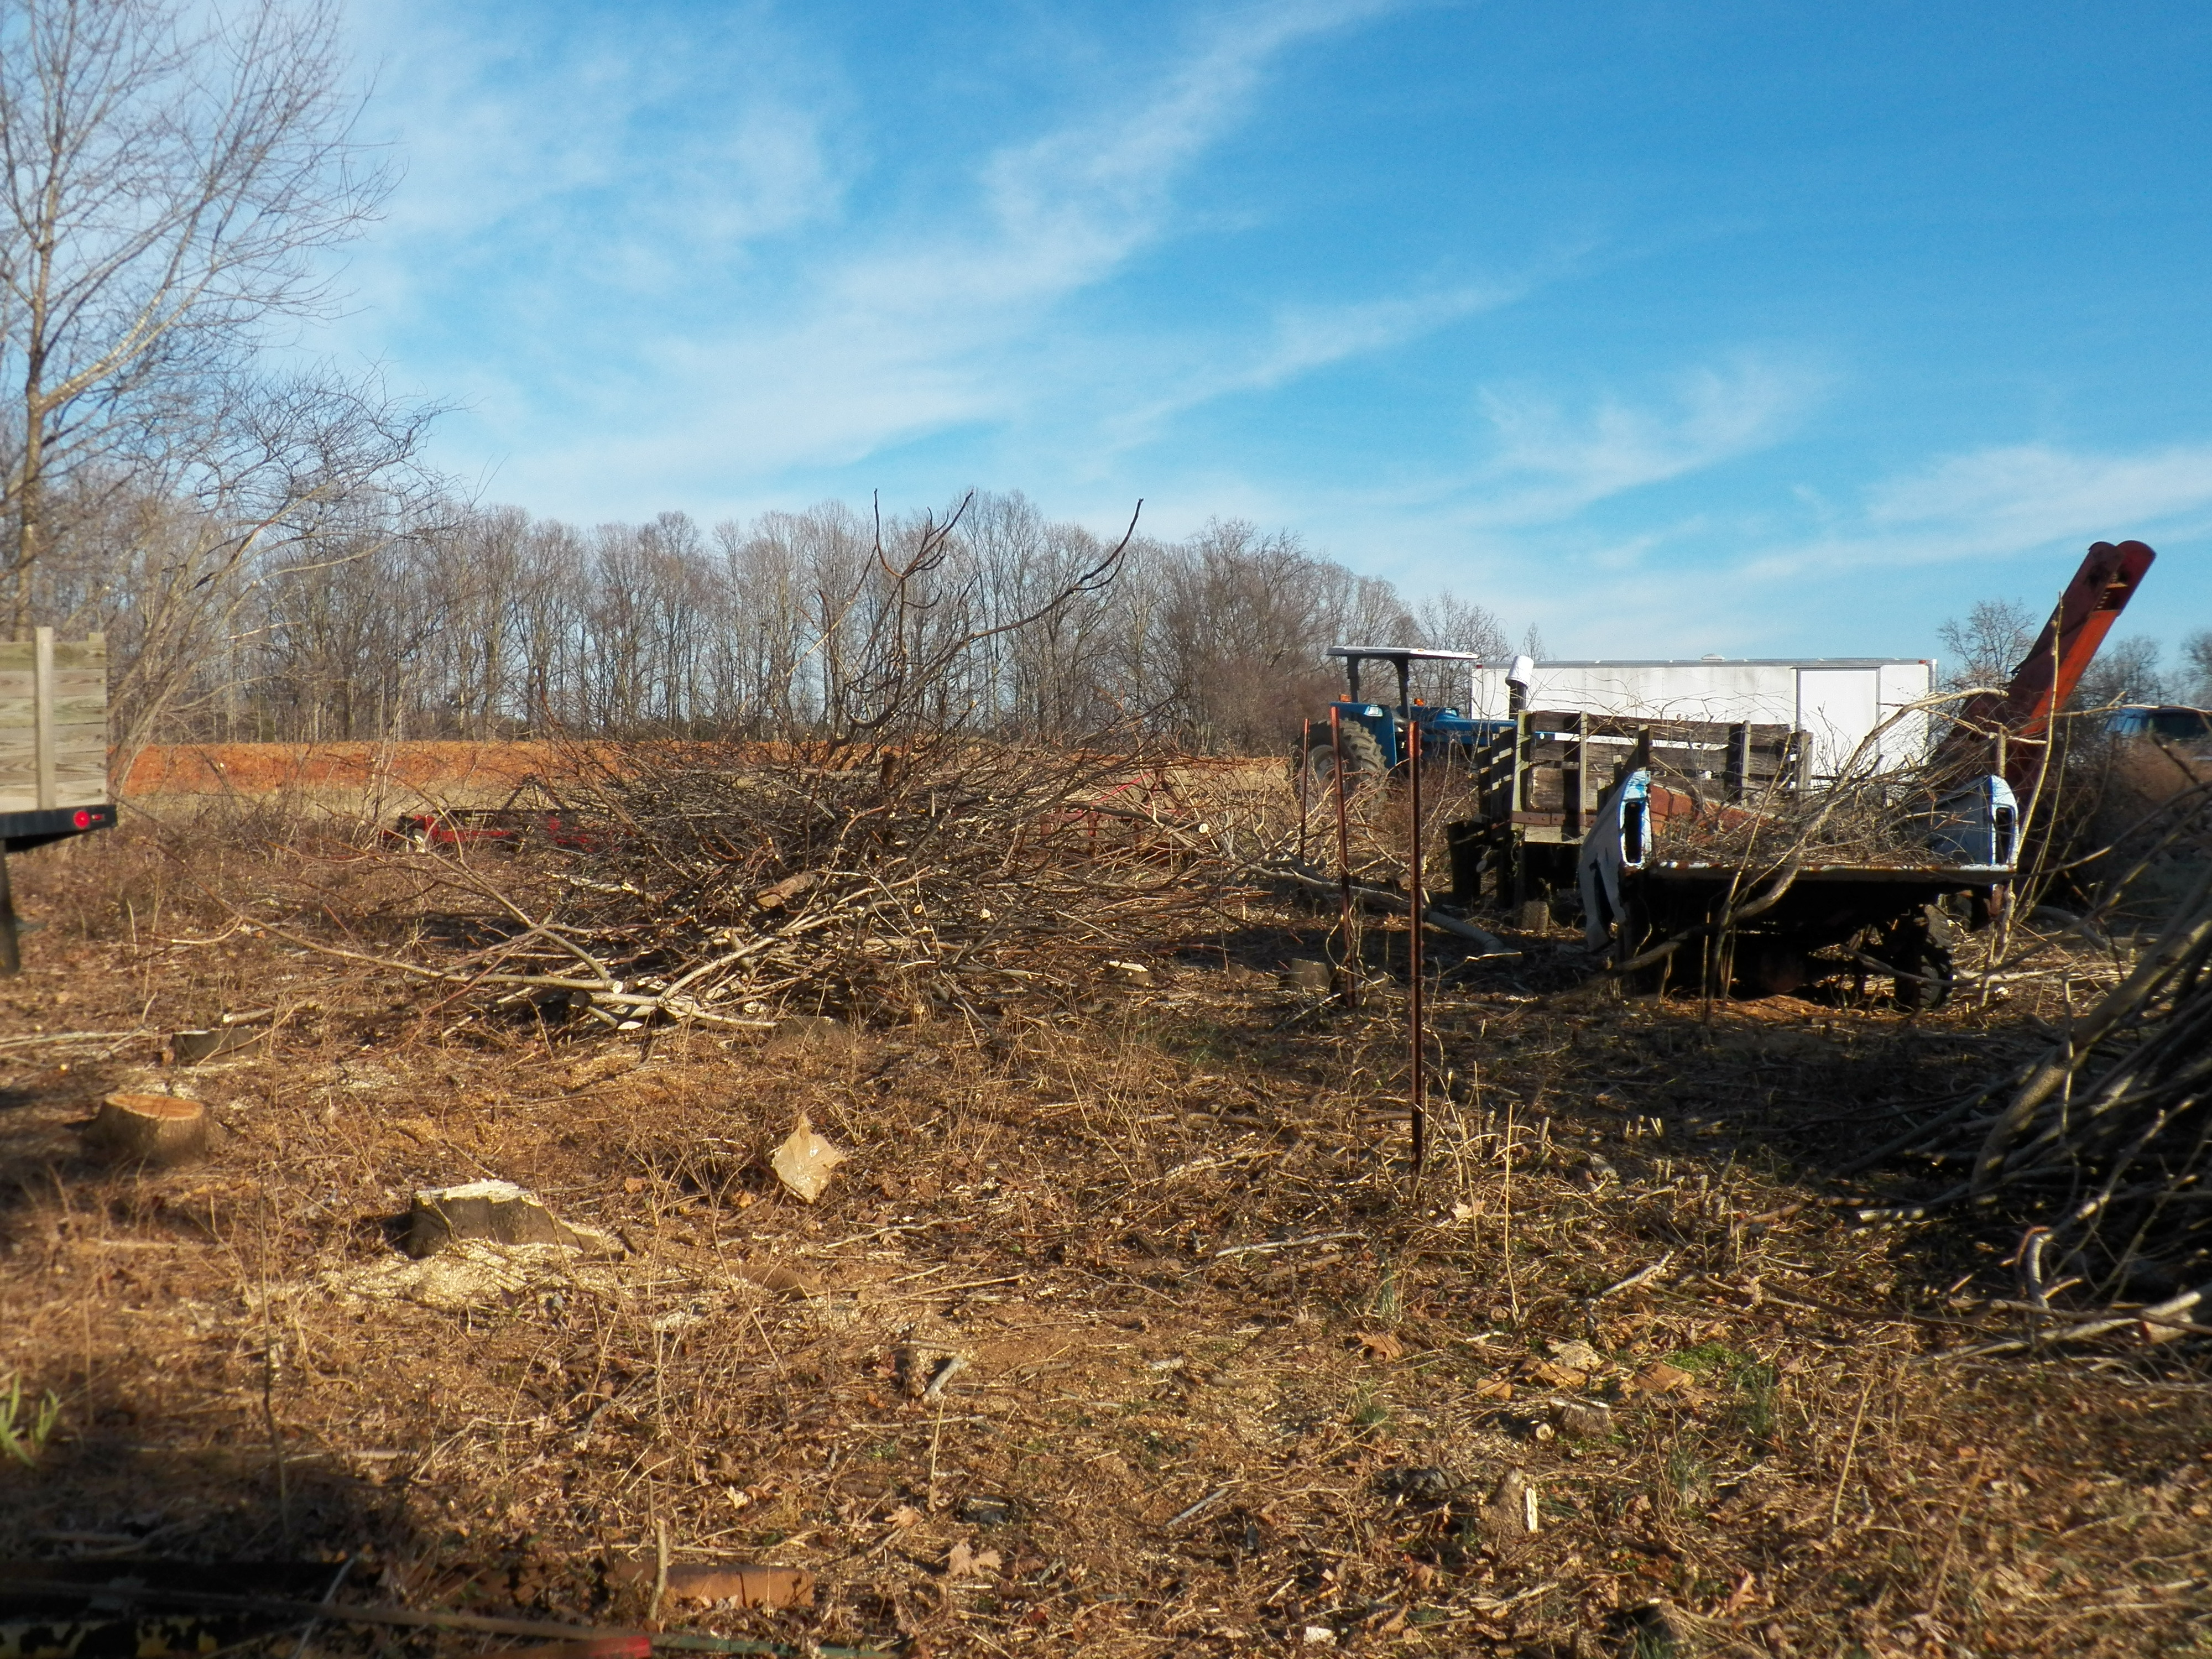 All the trees have been cut down and the brush is ready to be burned.